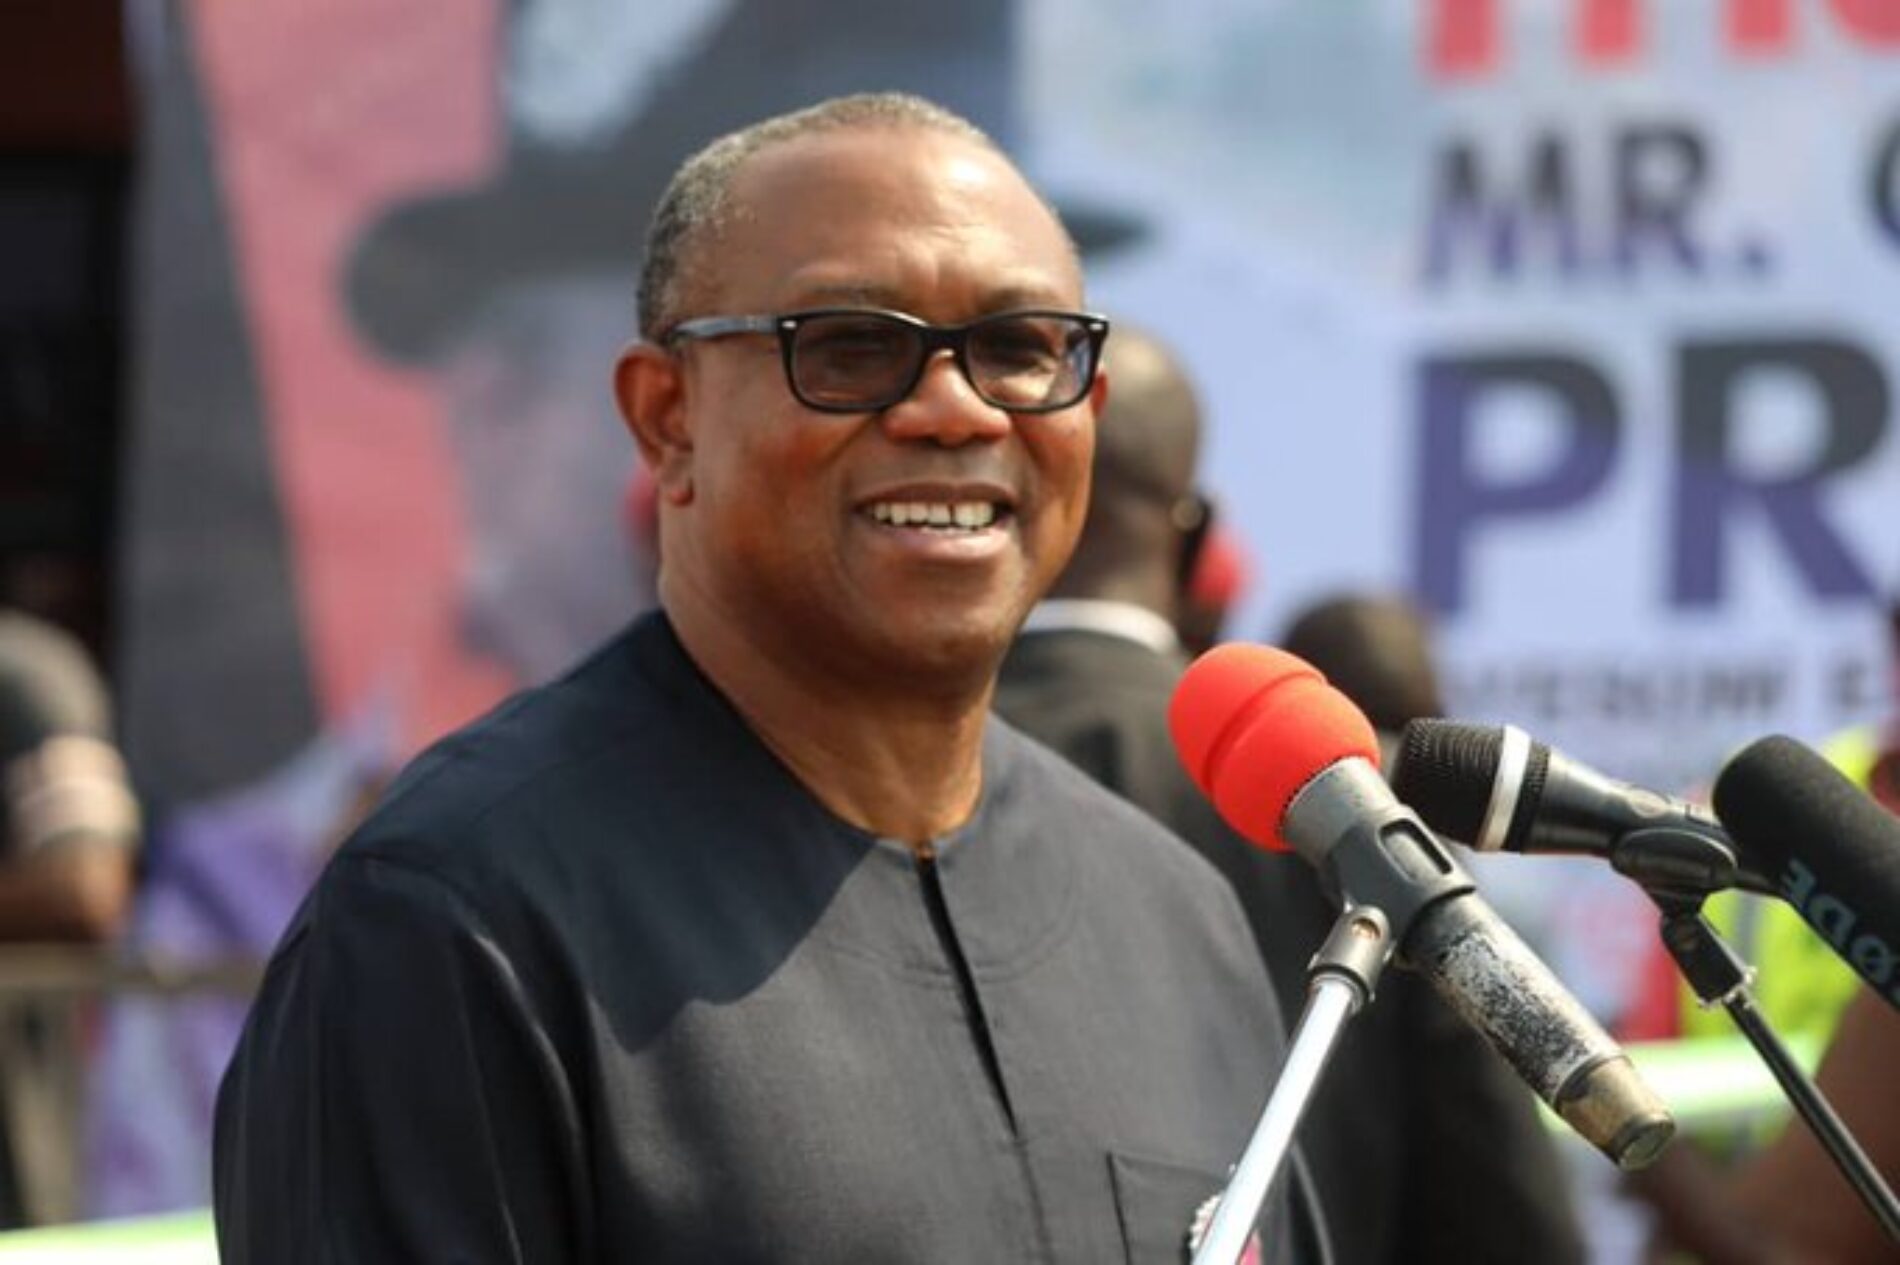 PETER OBI, THE PRESIDENTIAL CANDIDACY AND QUEER RIGHTS